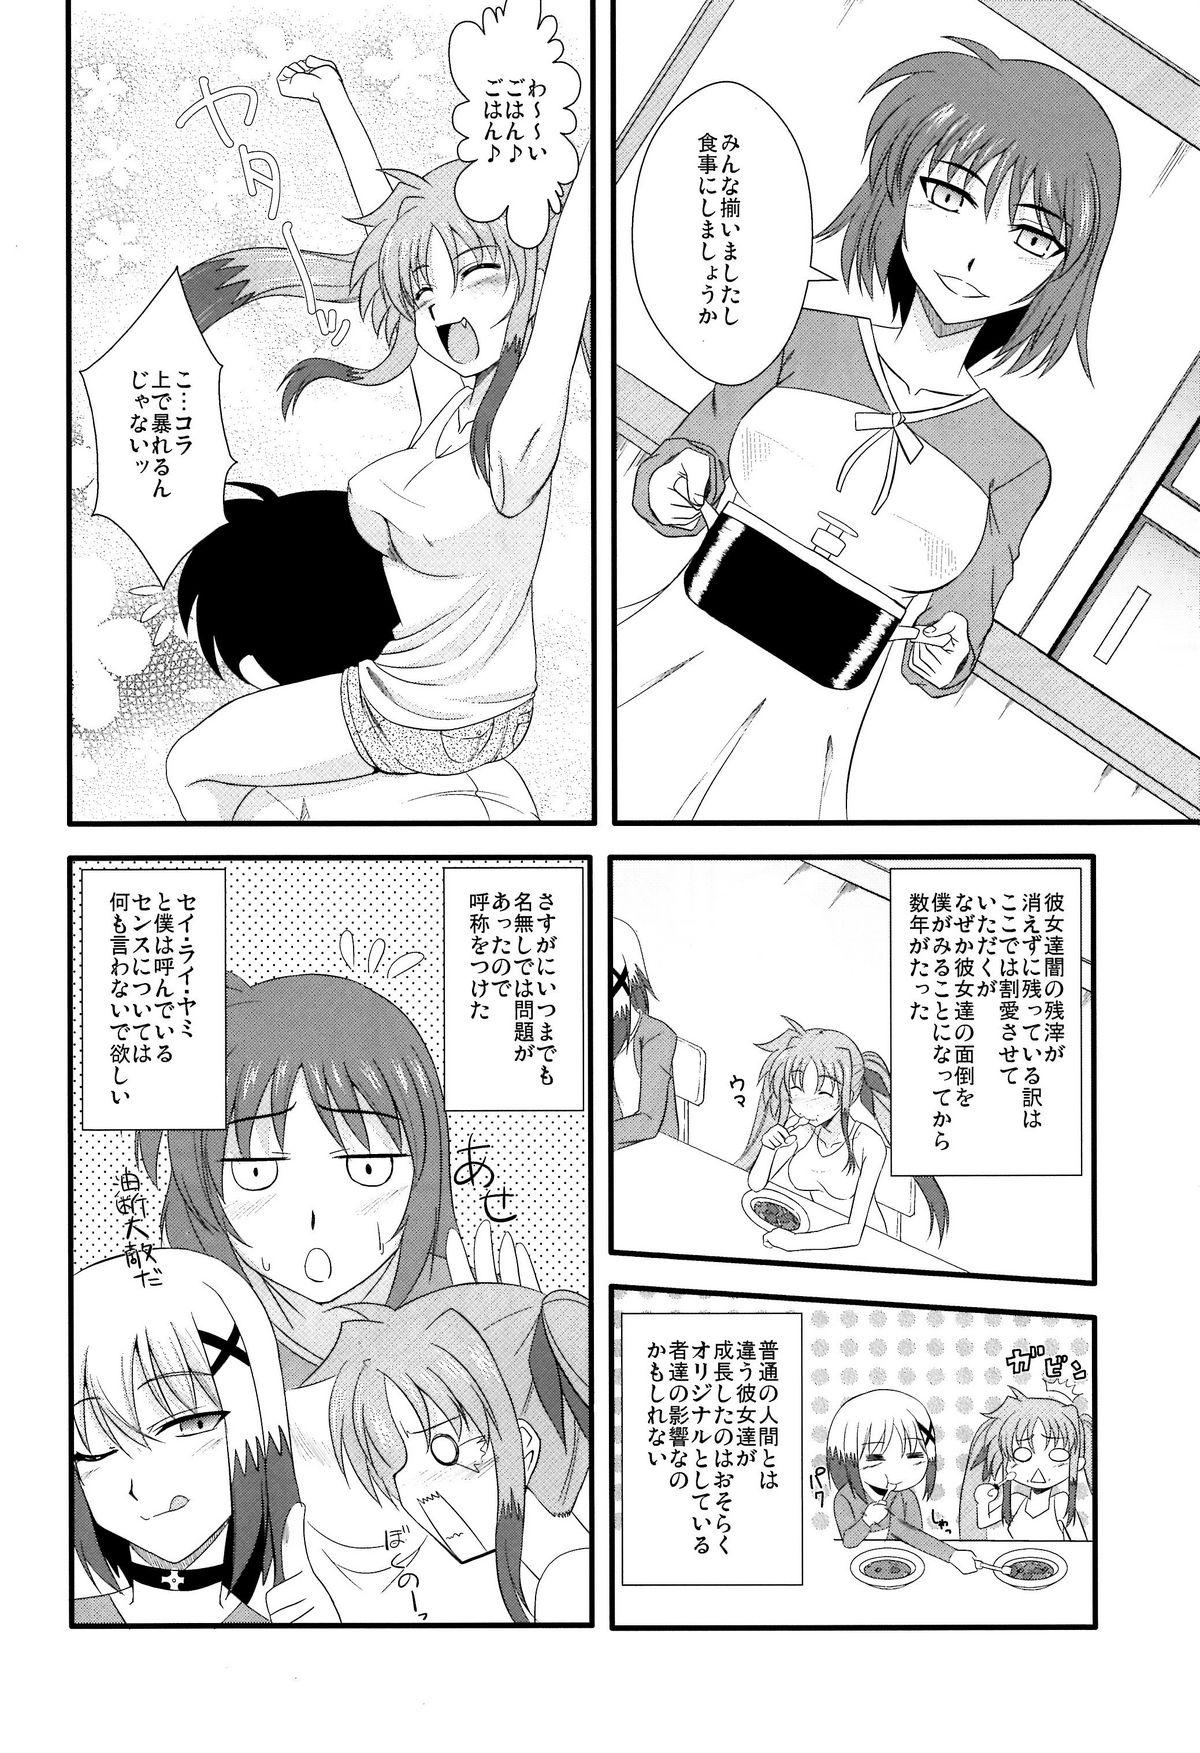 Point Of View Material Station - Mahou shoujo lyrical nanoha Mommy - Page 3